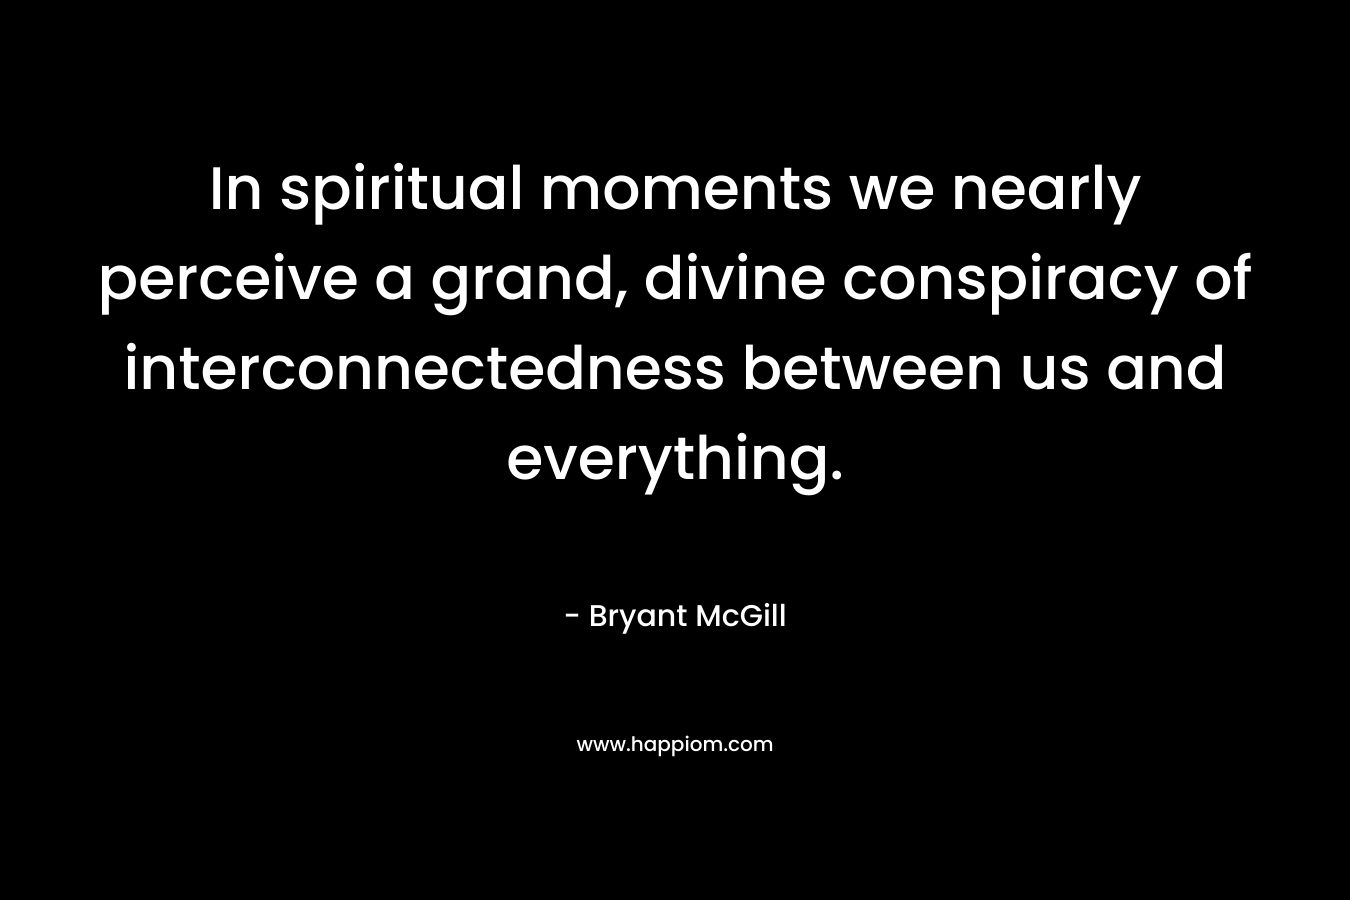 In spiritual moments we nearly perceive a grand, divine conspiracy of interconnectedness between us and everything.